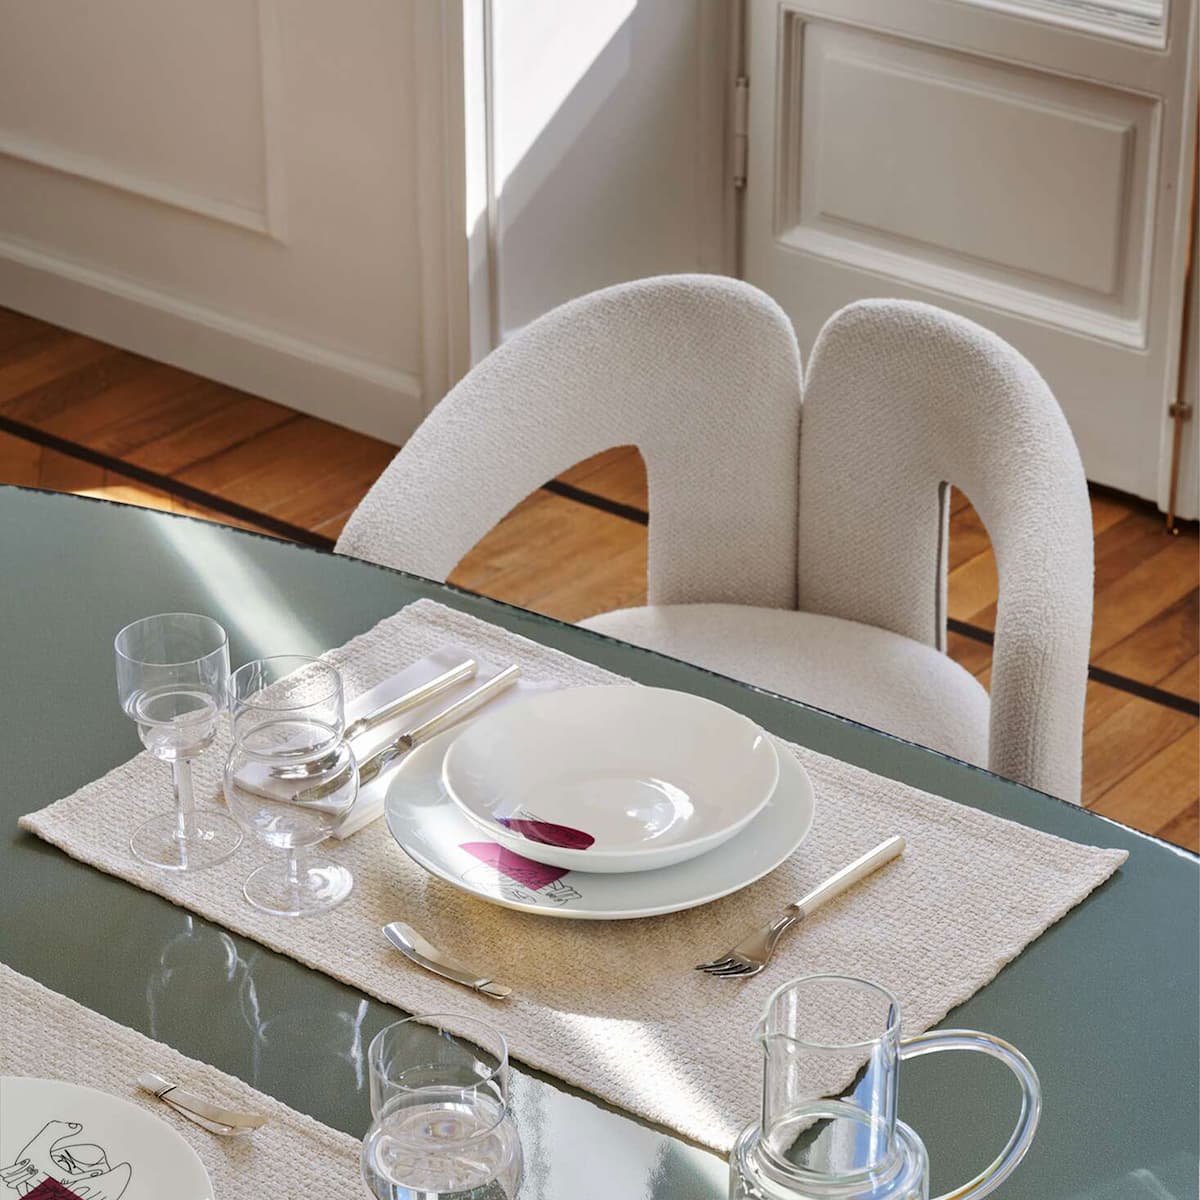 Dudet Chair By Patricia Urquiola in White - Cassina